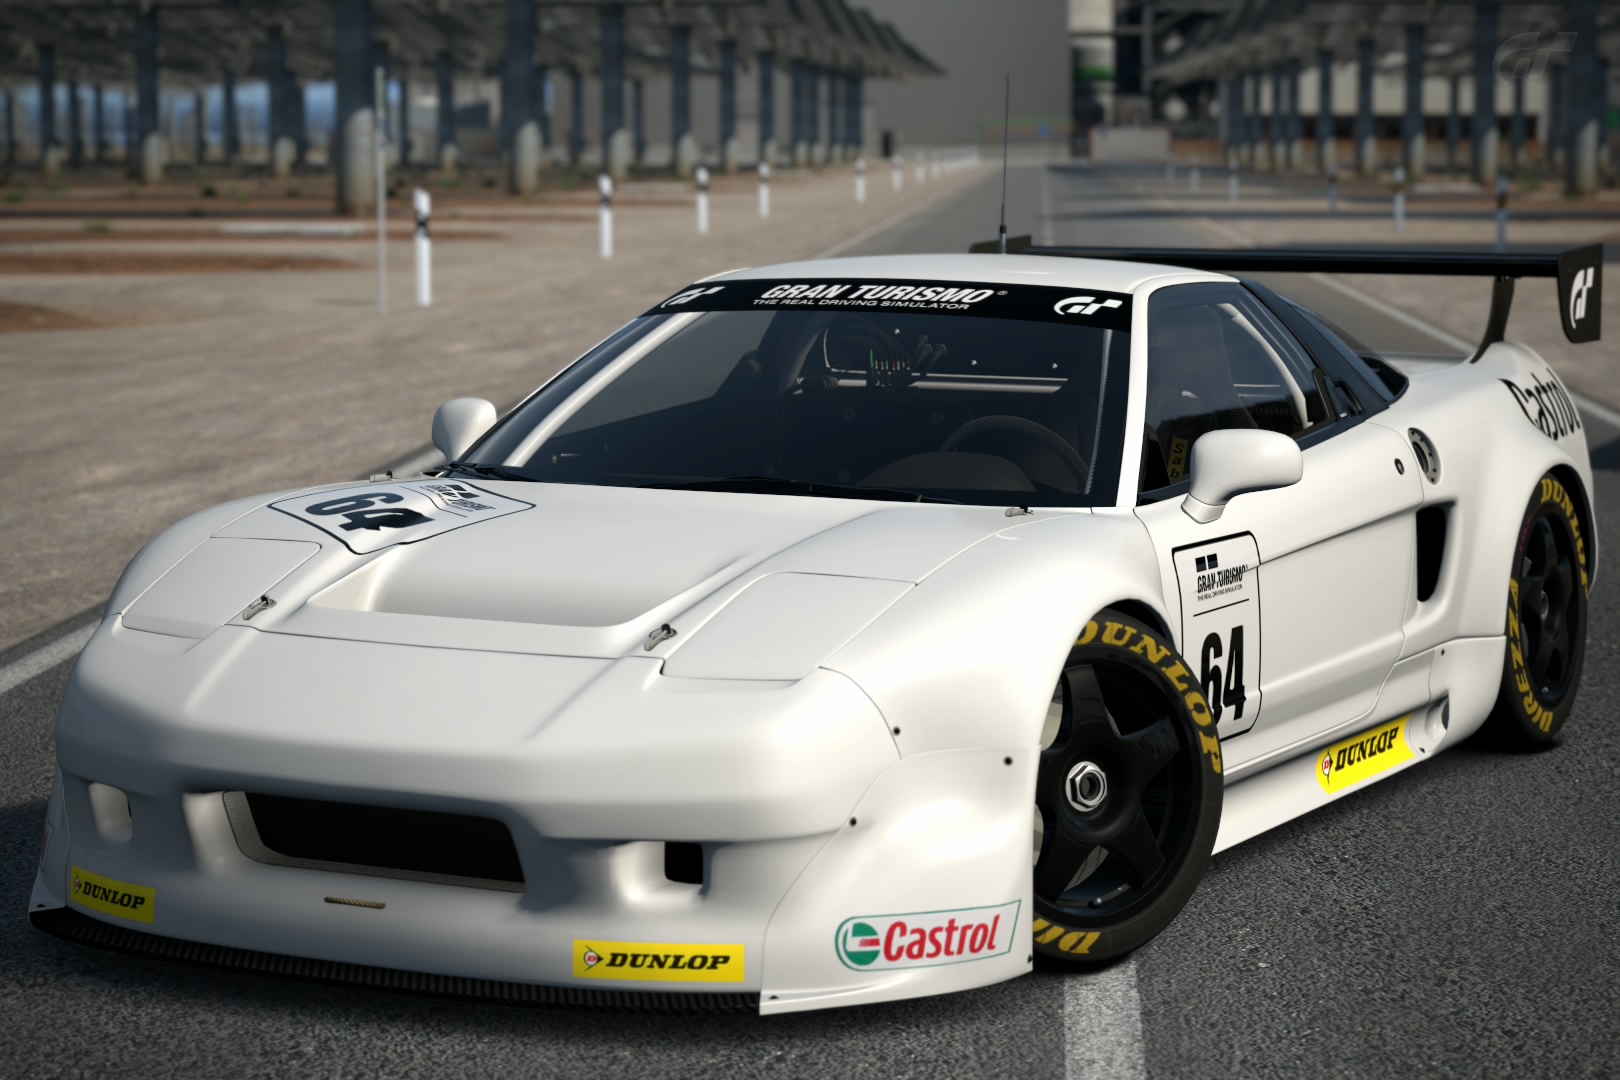 Gran Turismo 2 - All cars from simulation mode (600+ cars) 